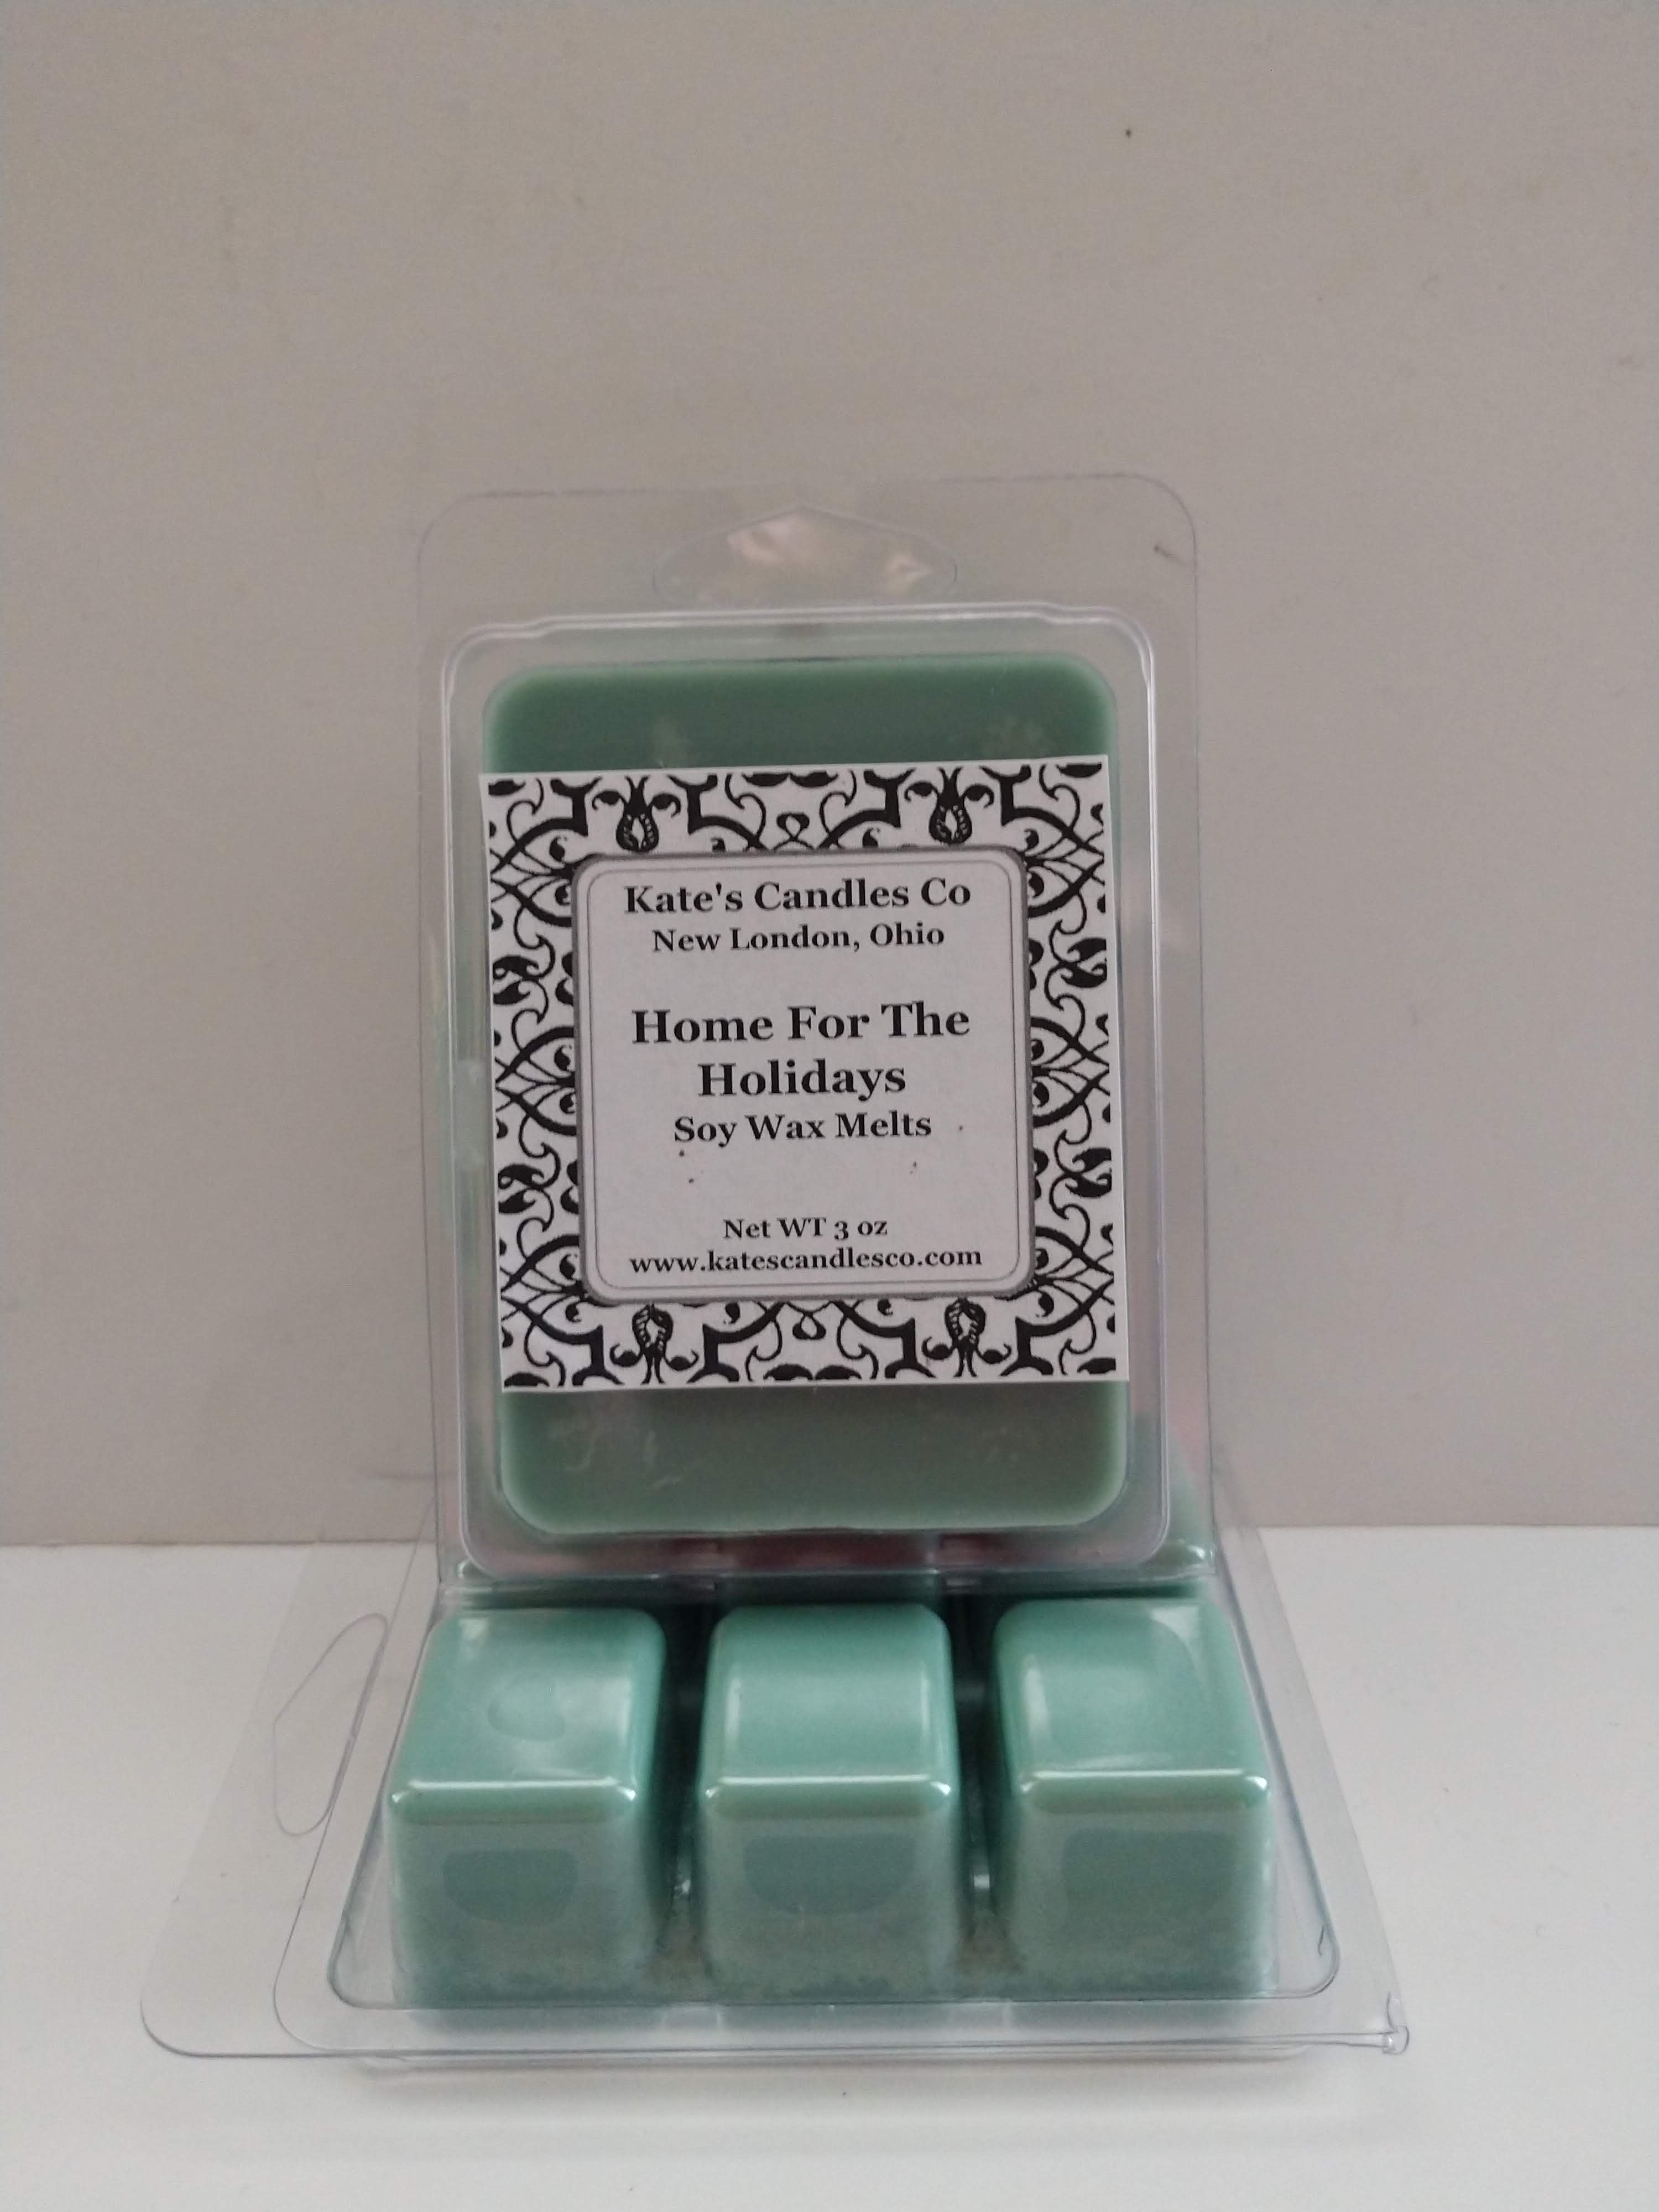 Home For The Holidays Soy Wax Melts